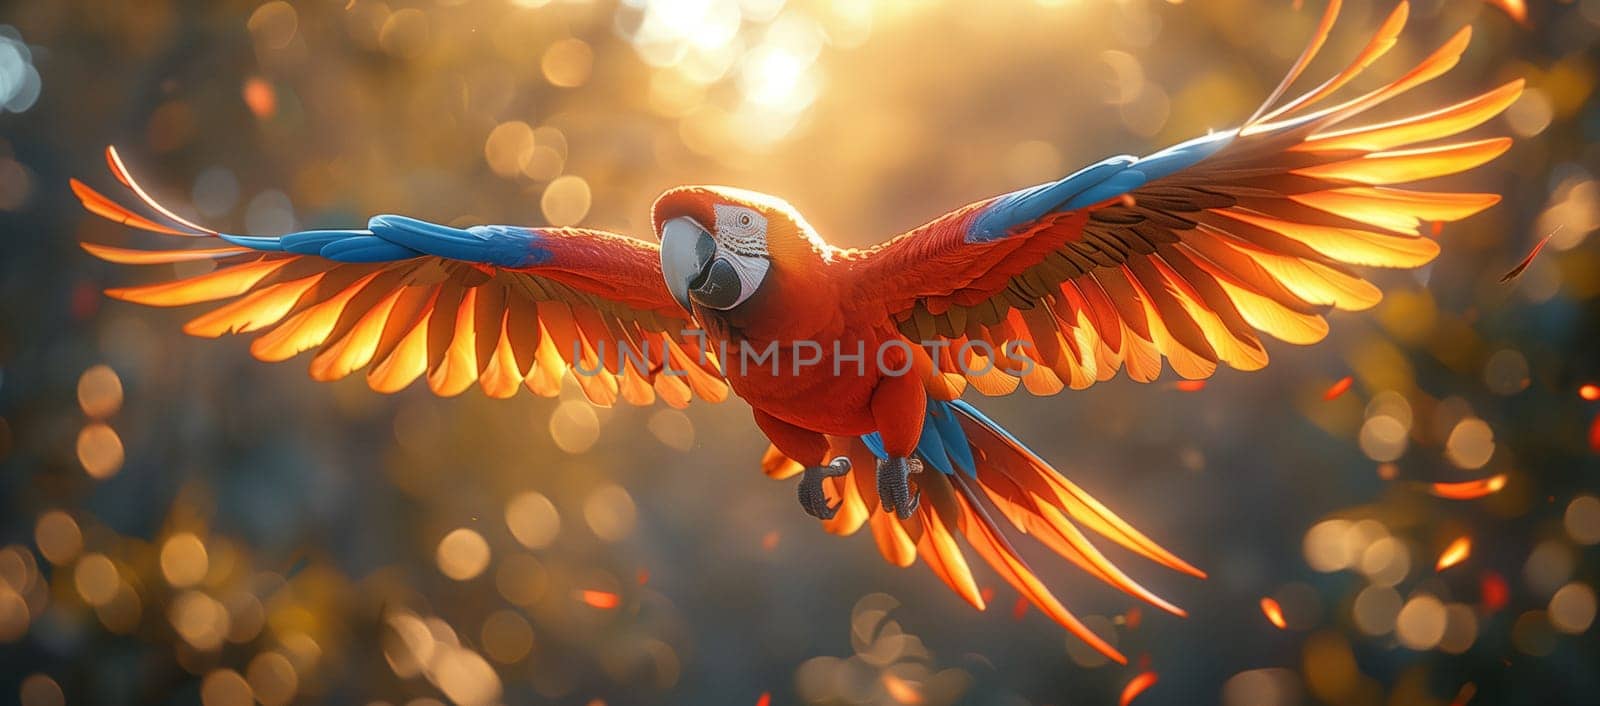 A colorful parrot soars with outstretched wings in the sky by richwolf